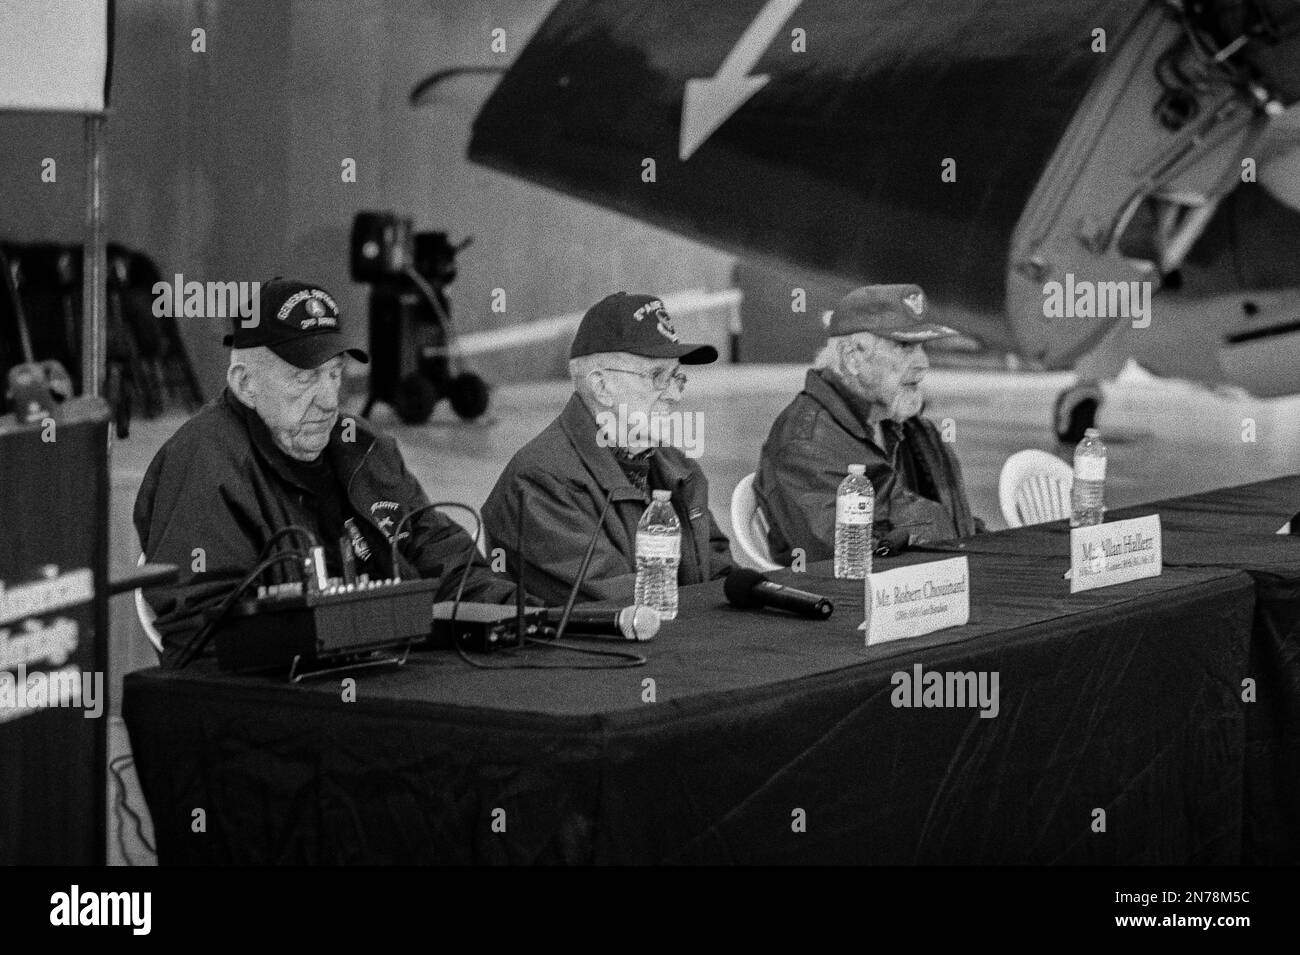 A group of WWII veterans speak to an audience in the hanger at the American Heritage Museum. The image was captured on analog black and white film. Hu Stock Photo